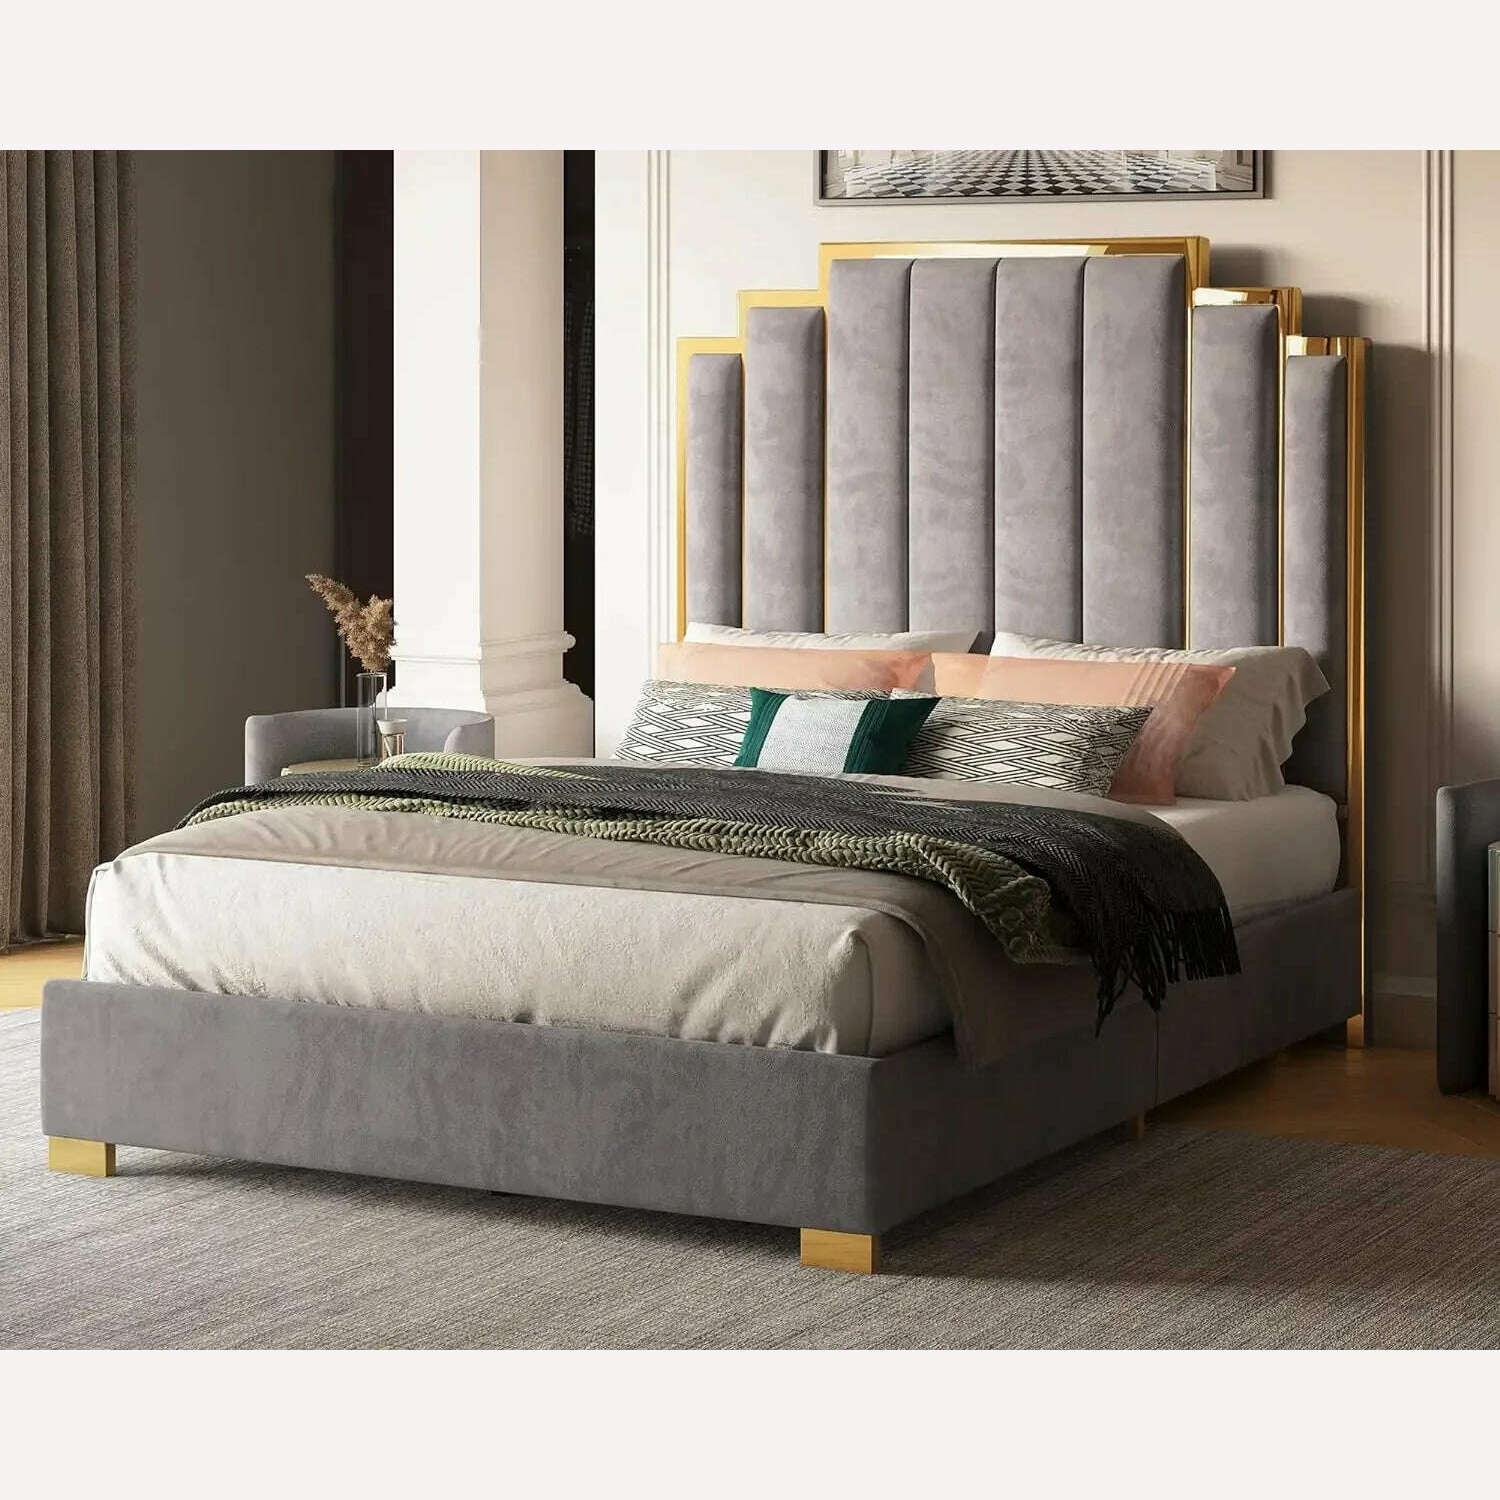 KIMLUD, Queen Size Bed Frame, 61.4" Velvet Upholstered Beds with Gold Trim Headboard/No Box Spring Needed, Queen Size Bed Frame, Grey / United States / King, KIMLUD Womens Clothes